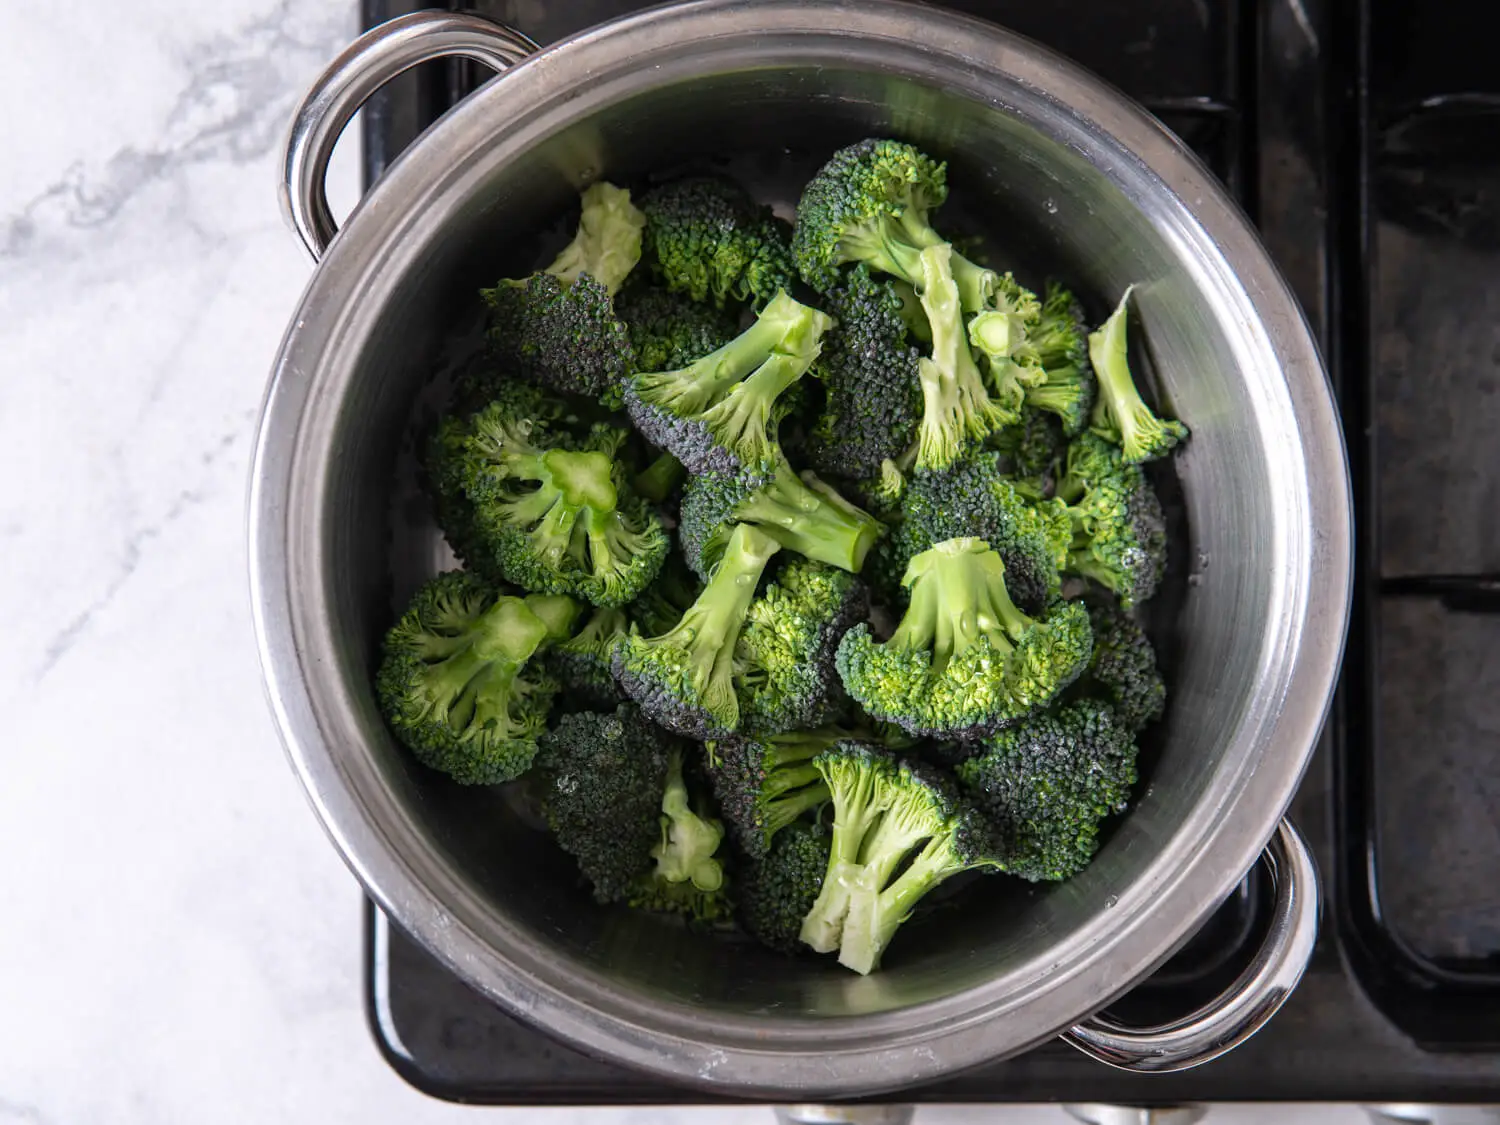 Add the broccoli and cook for another 2-3 minutes, or until the broccoli is just tender-crisp.